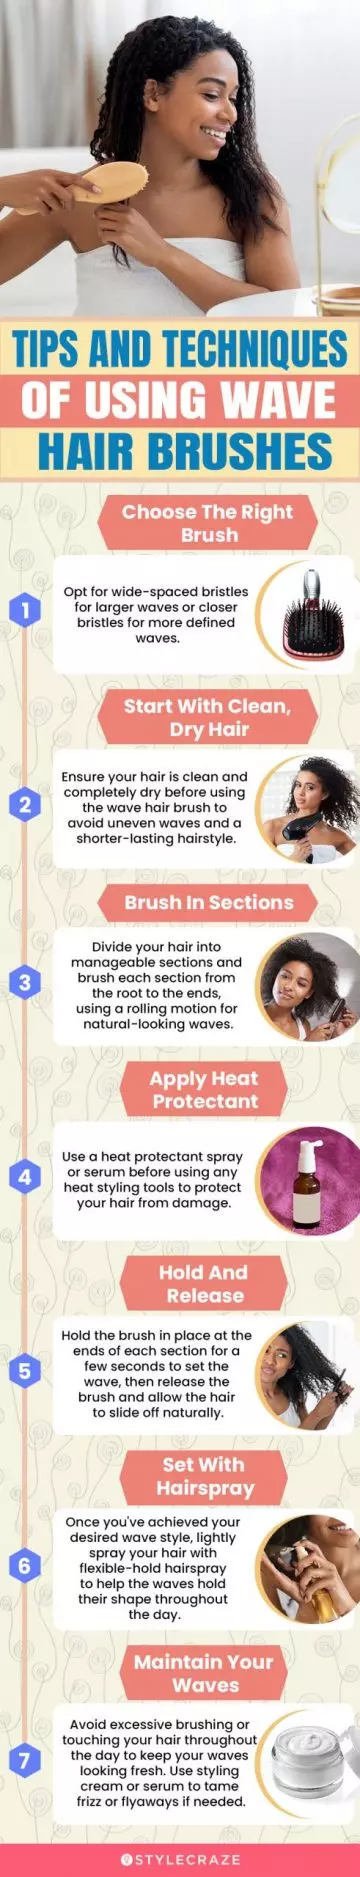 Tips And Techniques Of Using Wave Hair Brushes (infographic)